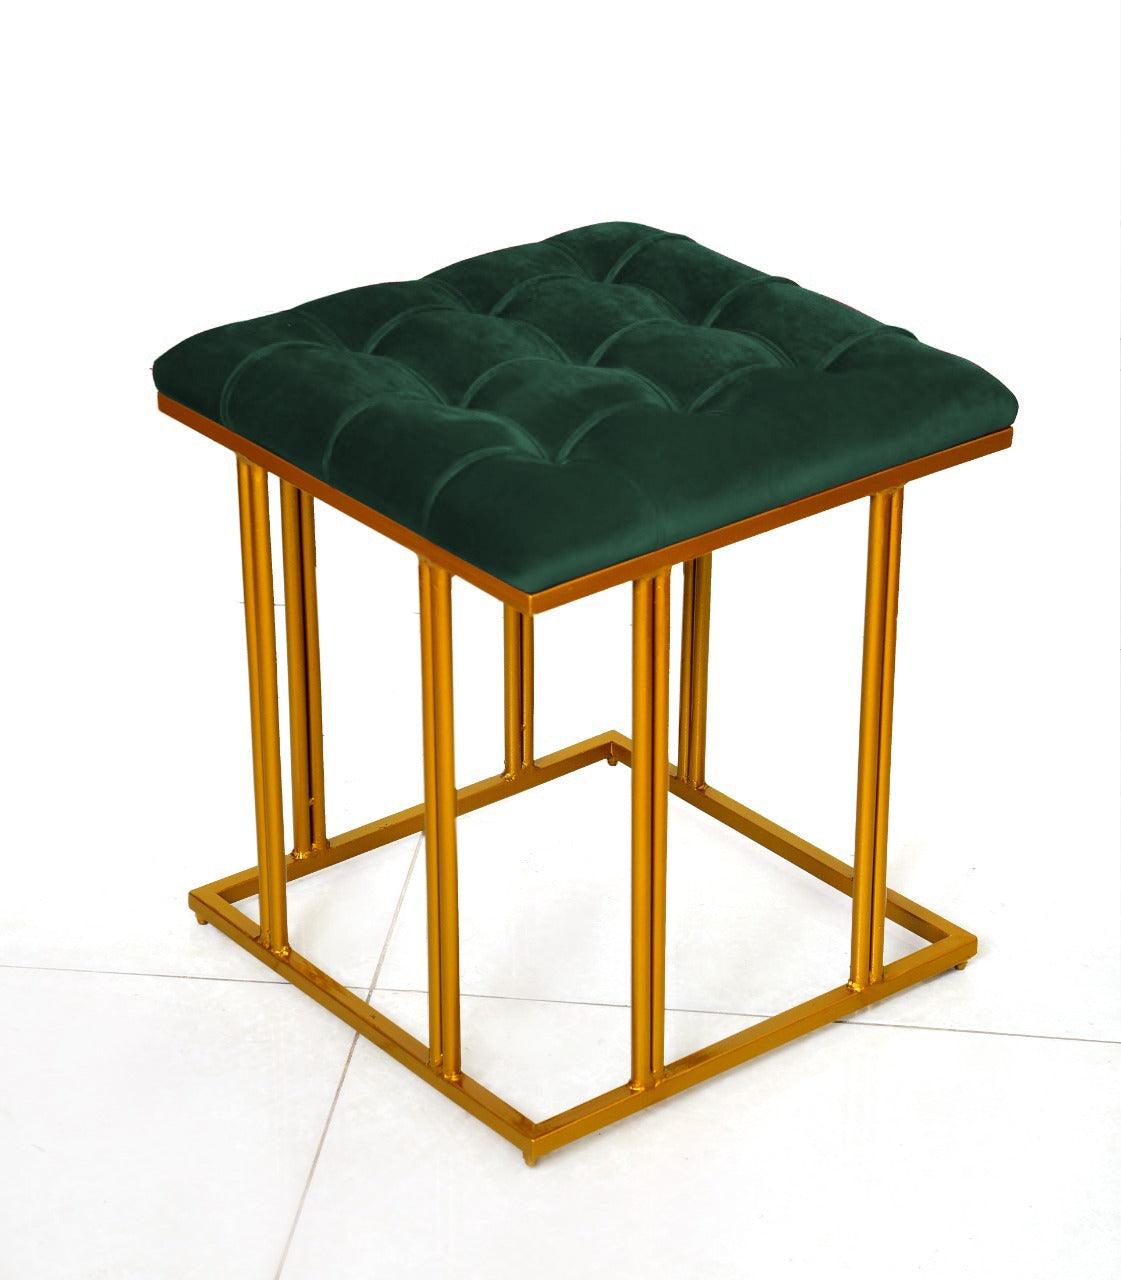 Luxury Velvet Square Stool With Steel Stand -904 - 92Bedding